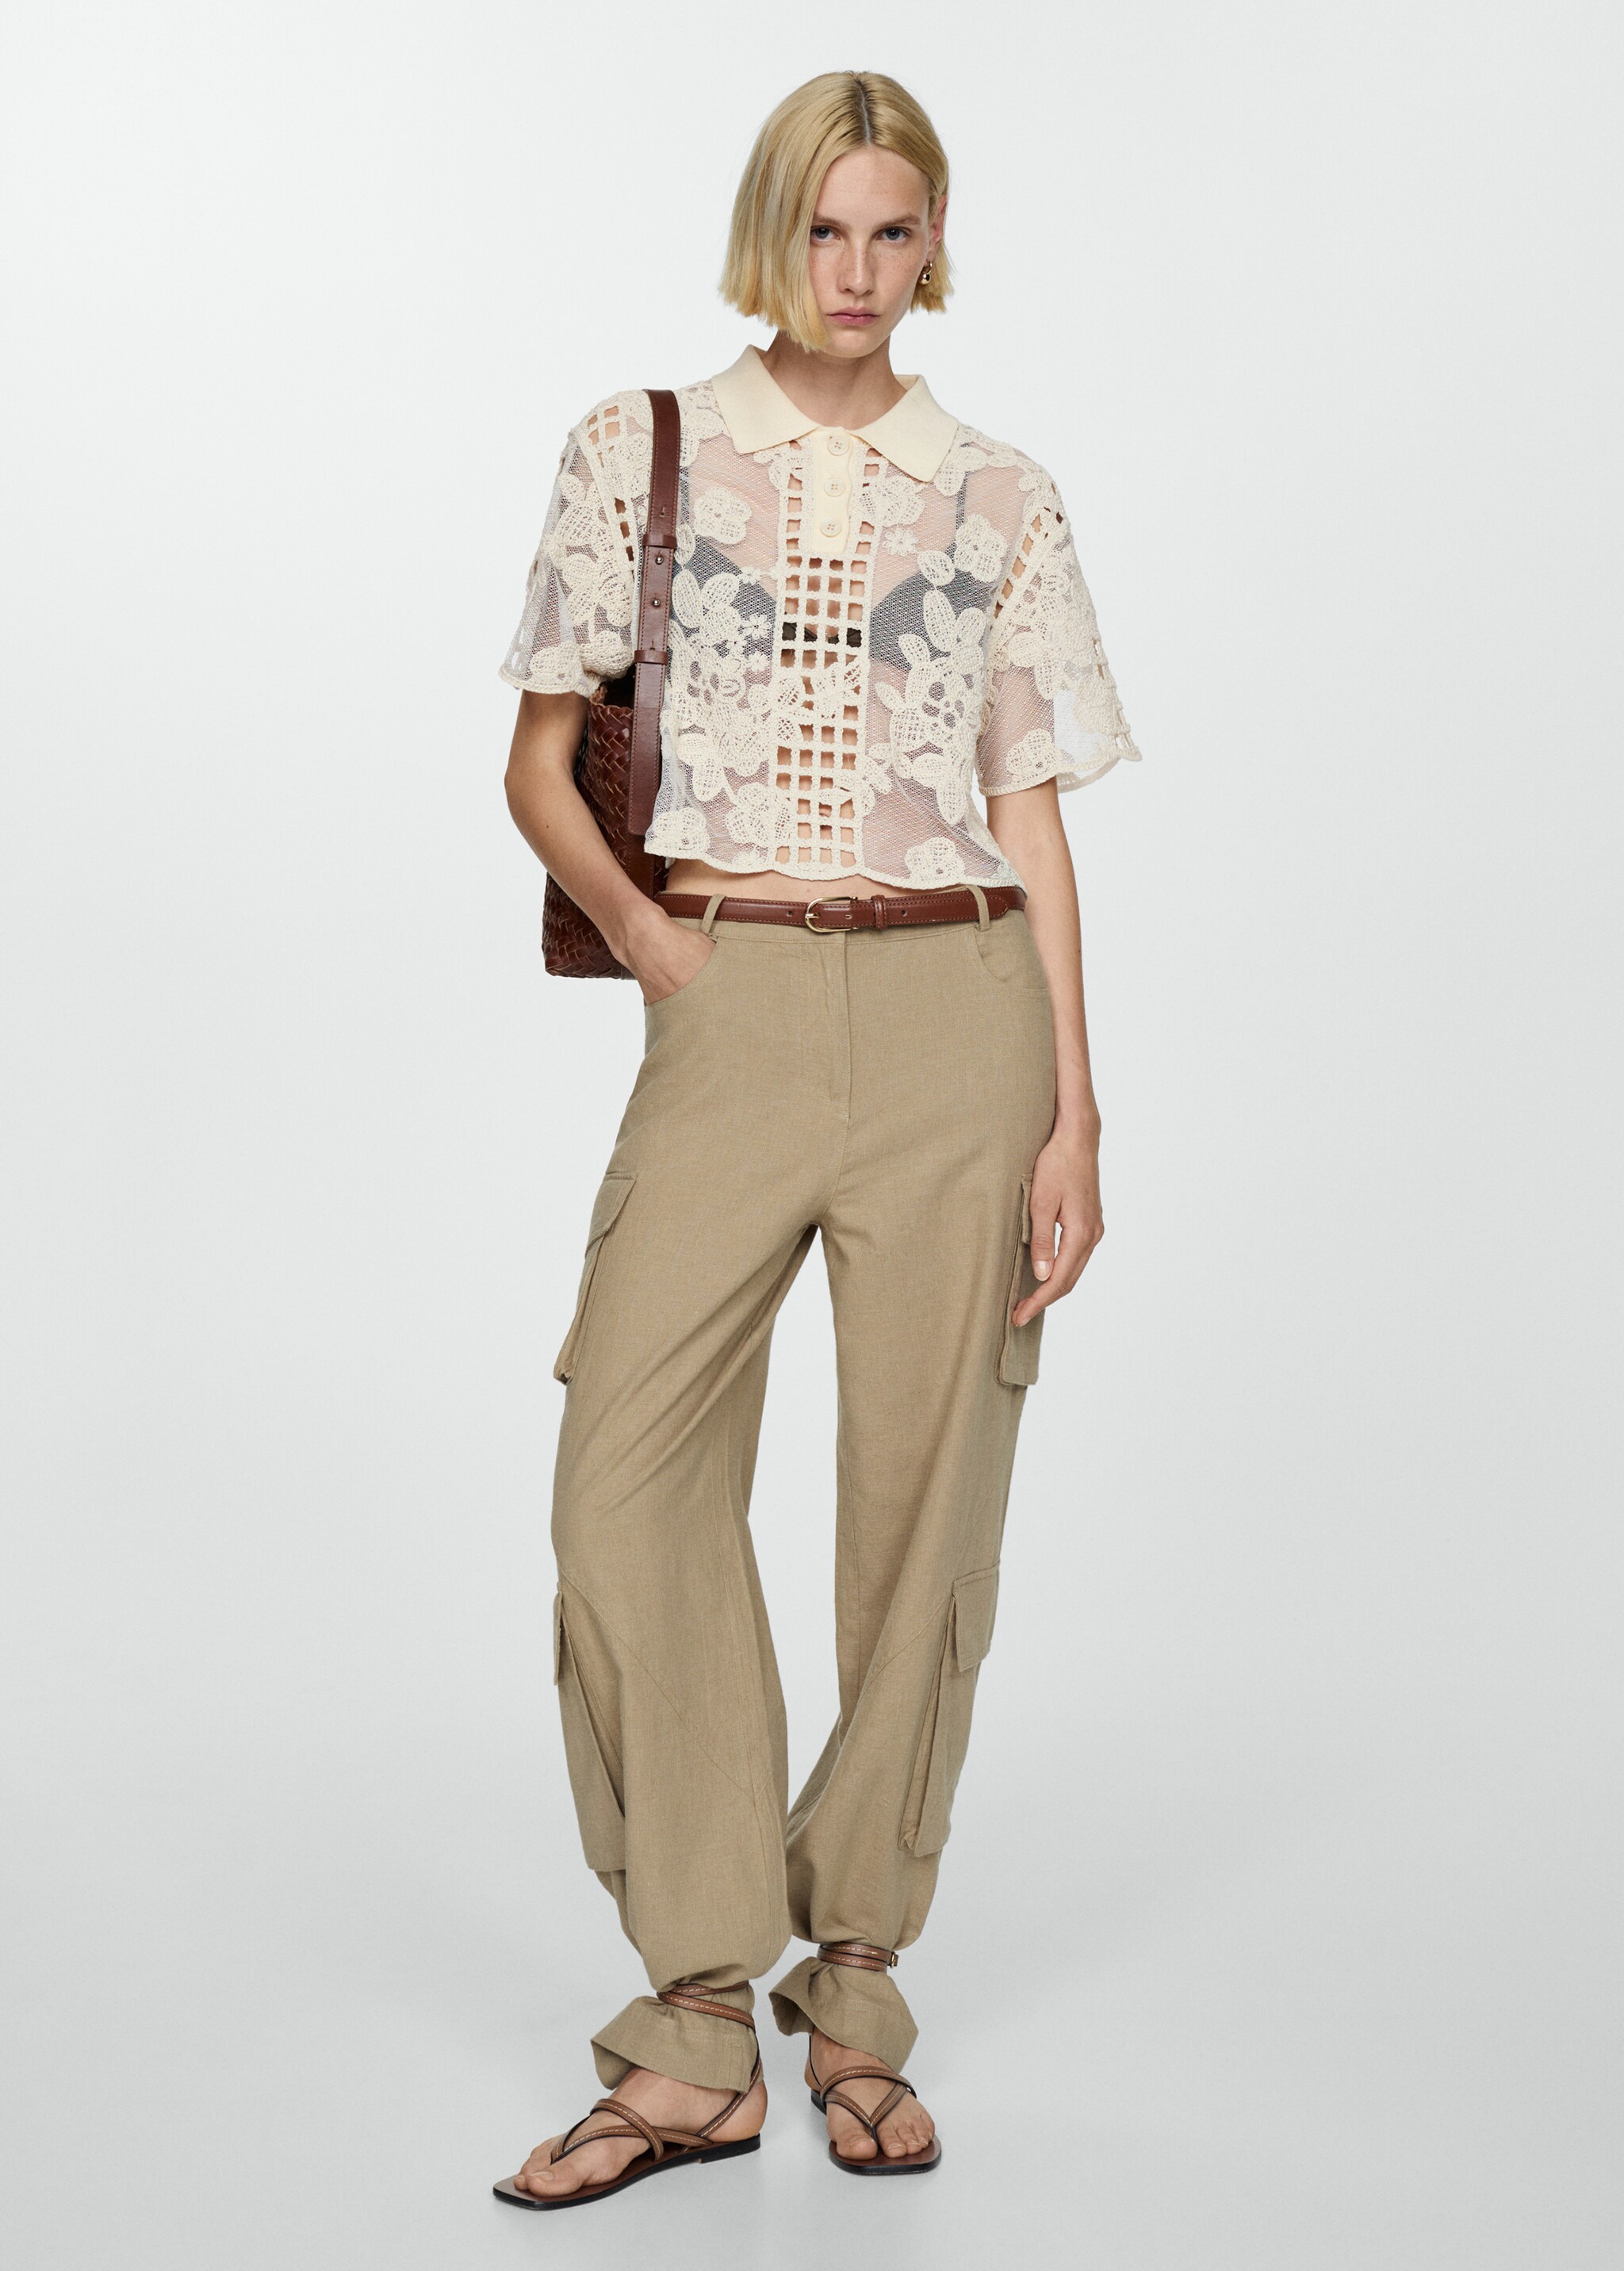  Embroidered blouse with openwork details - General plane